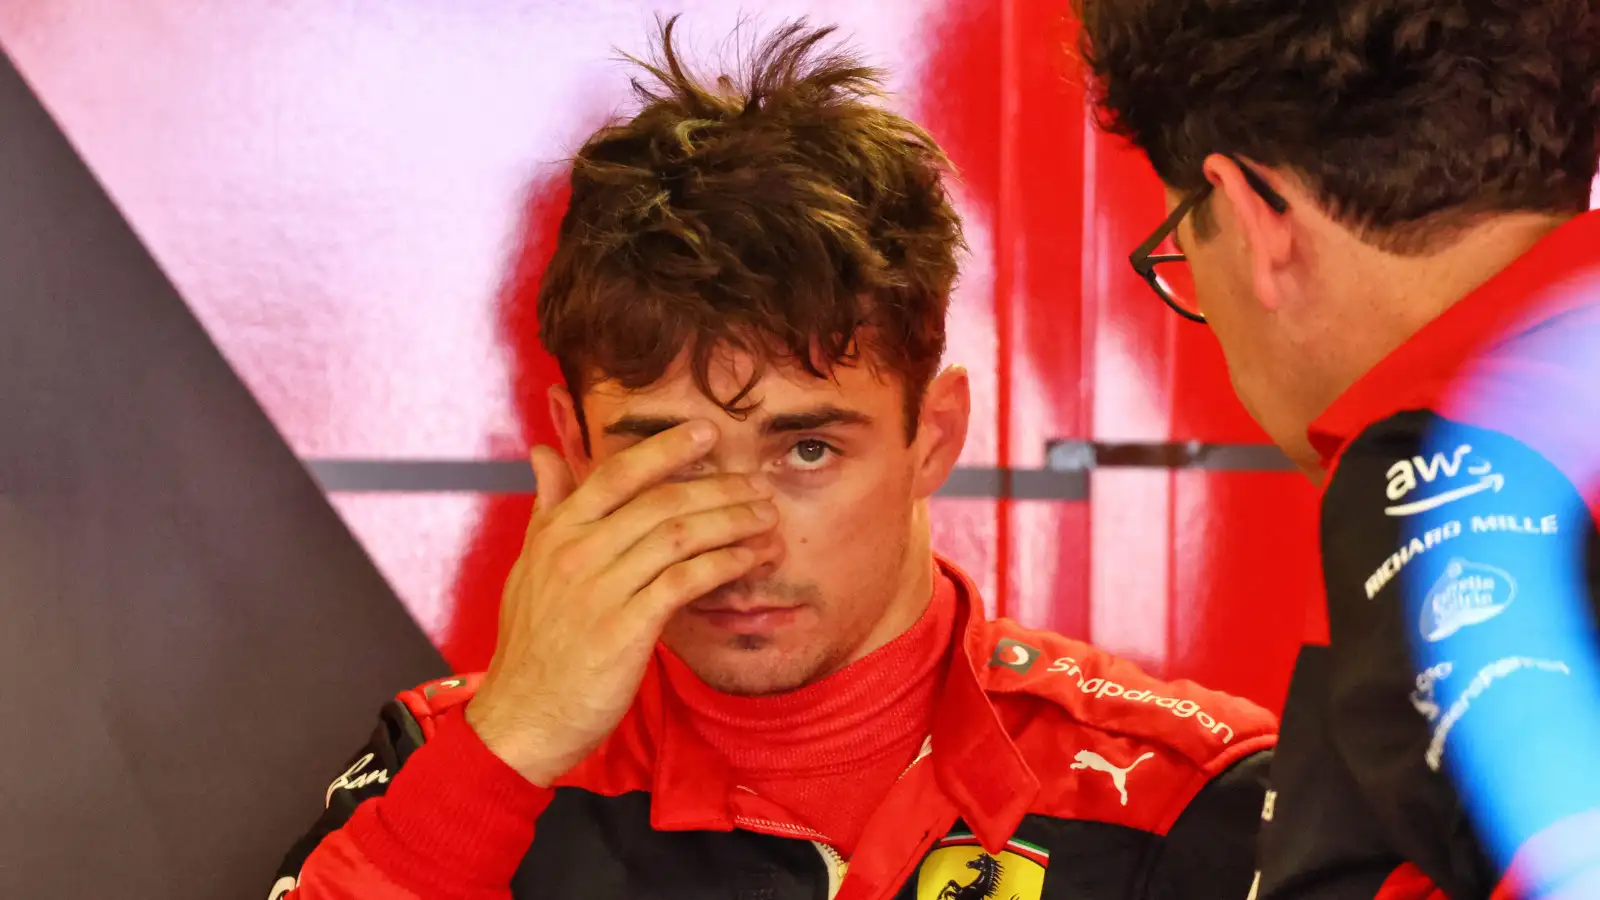 Mattia Binotto speaking with Charles Leclerc at the back of the garage. Monaco May 2022